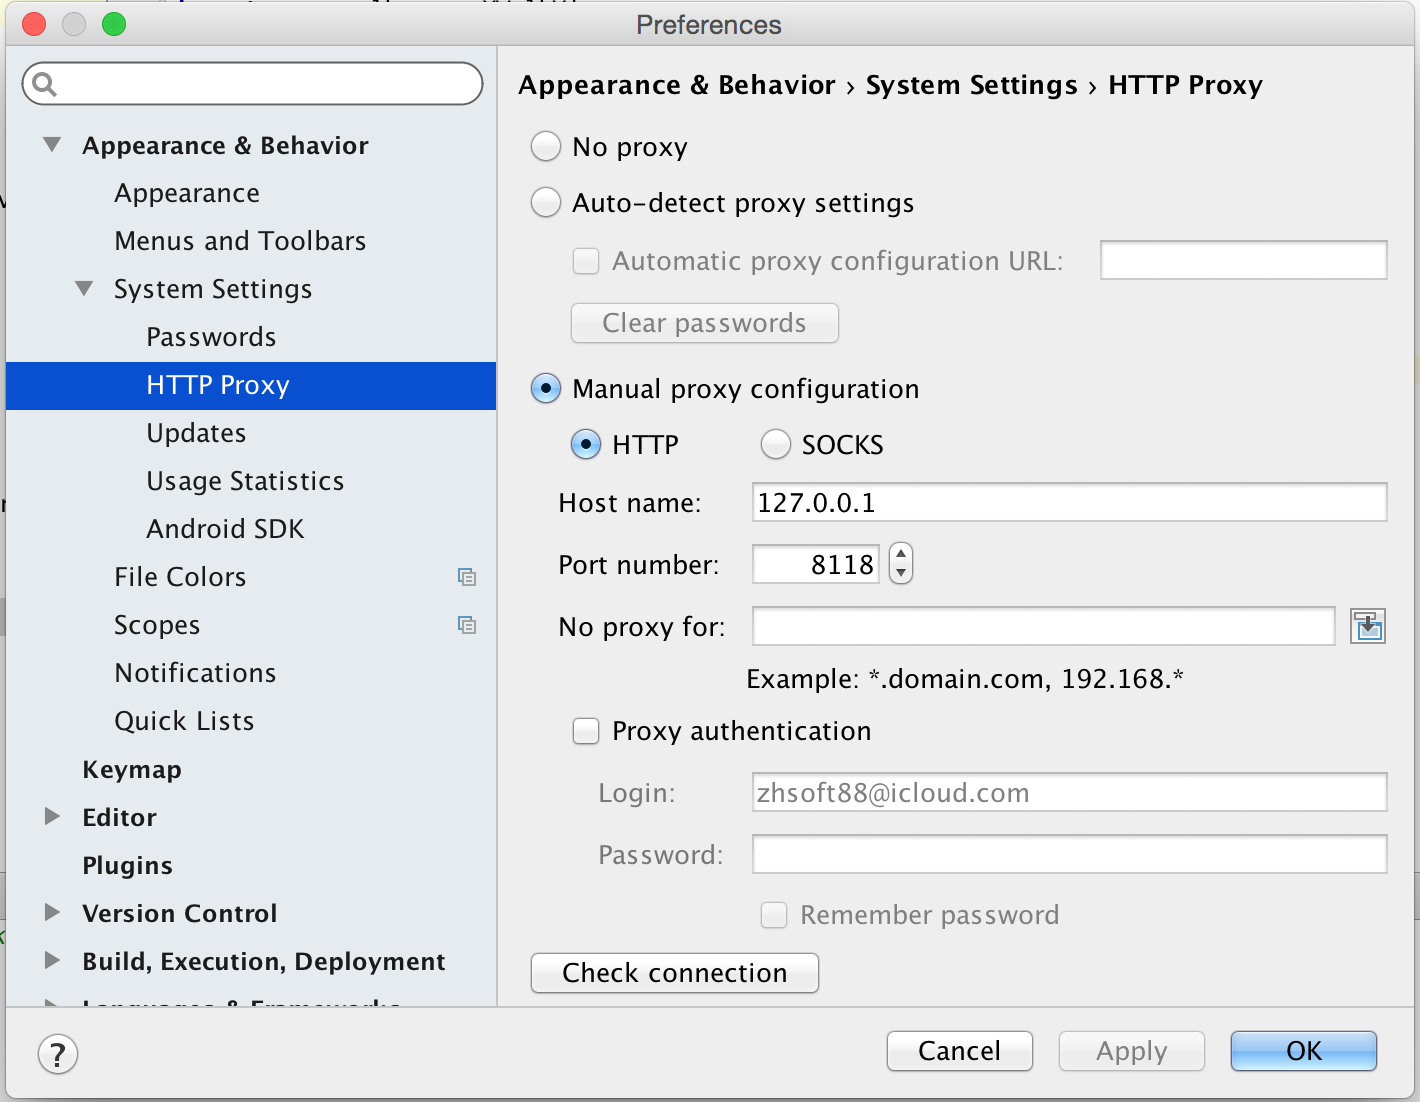 Experience Sharing: Proxy settings on Android Studio 